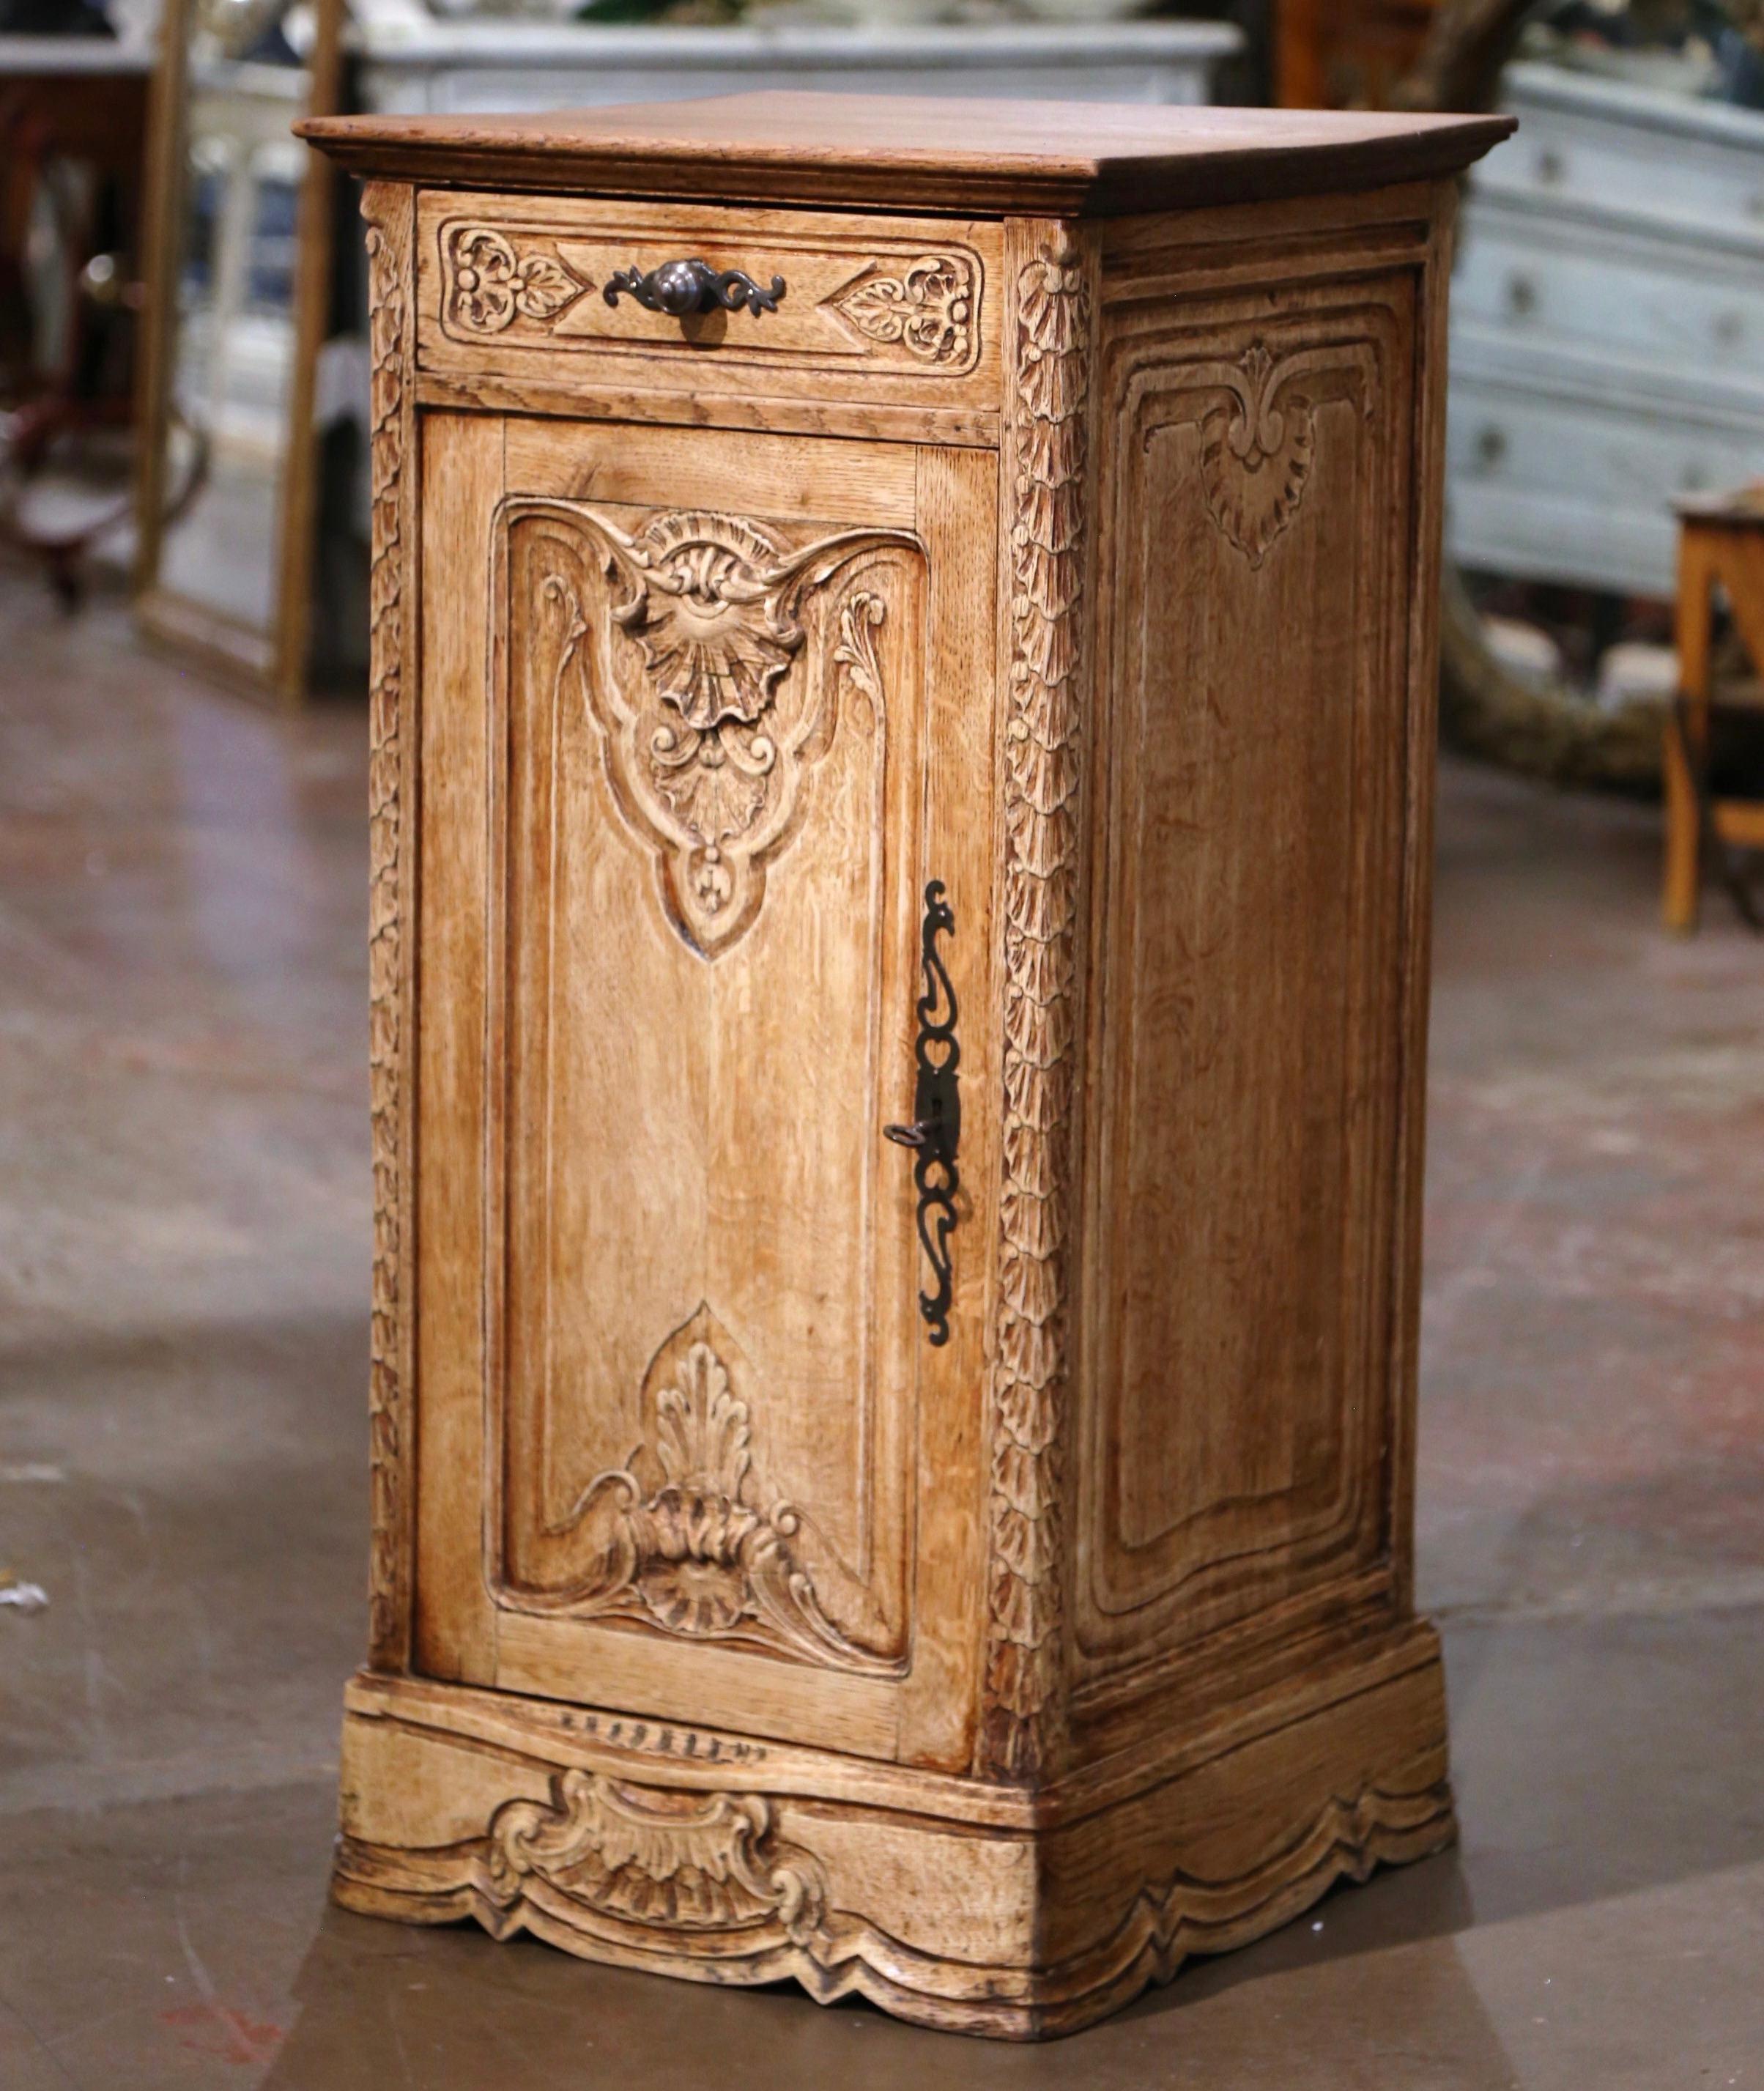 This elegant antique oak cabinet was crafted in Normandy, France circa 1920. The provincial 